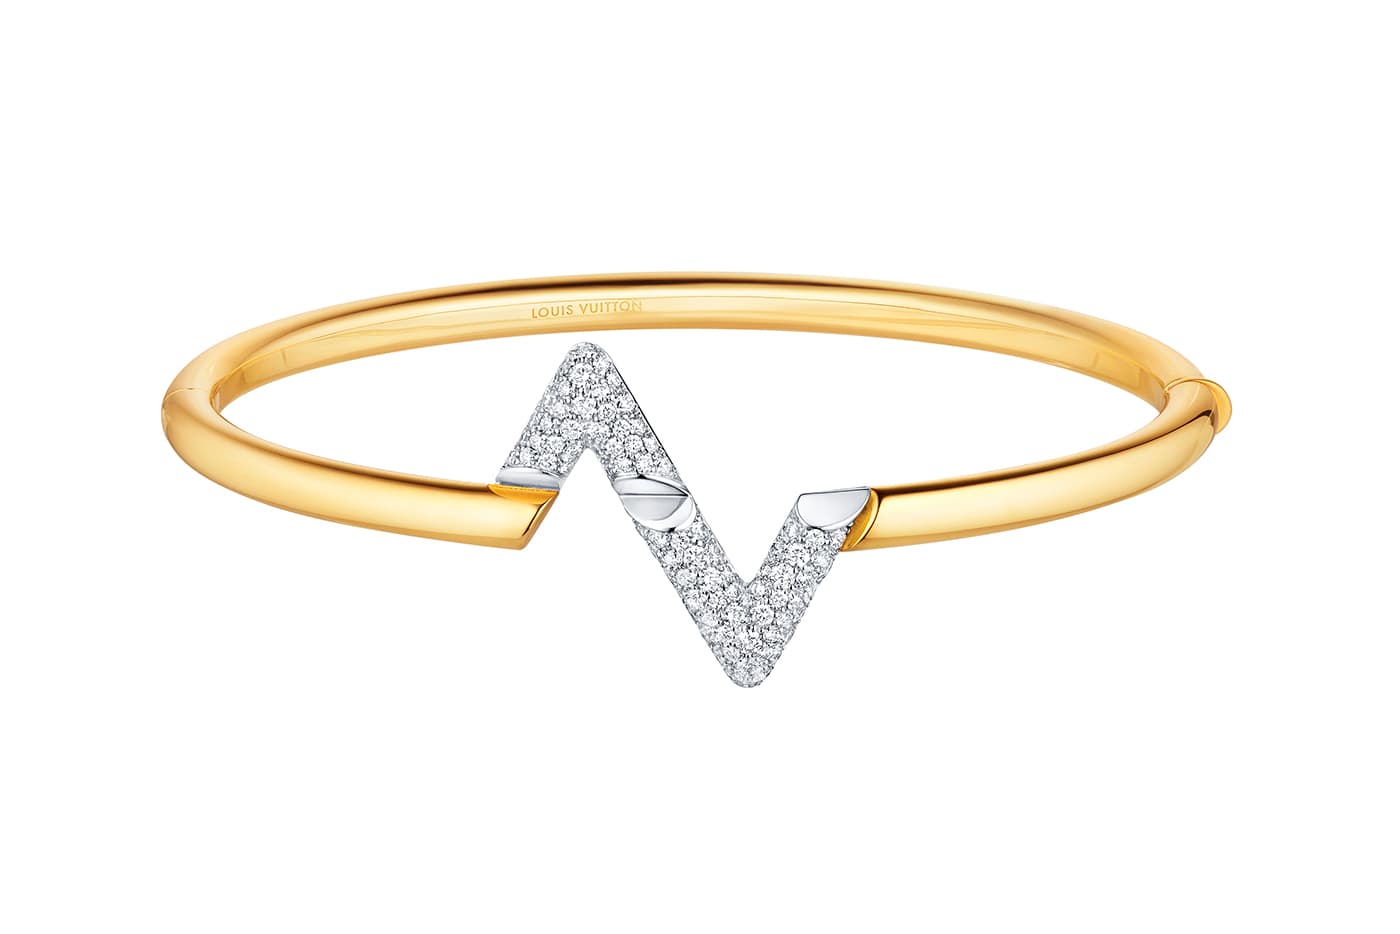 LV Volt Upside Down Bracelet, Yellow Gold, White Gold And Diamonds -  Jewelry - Categories